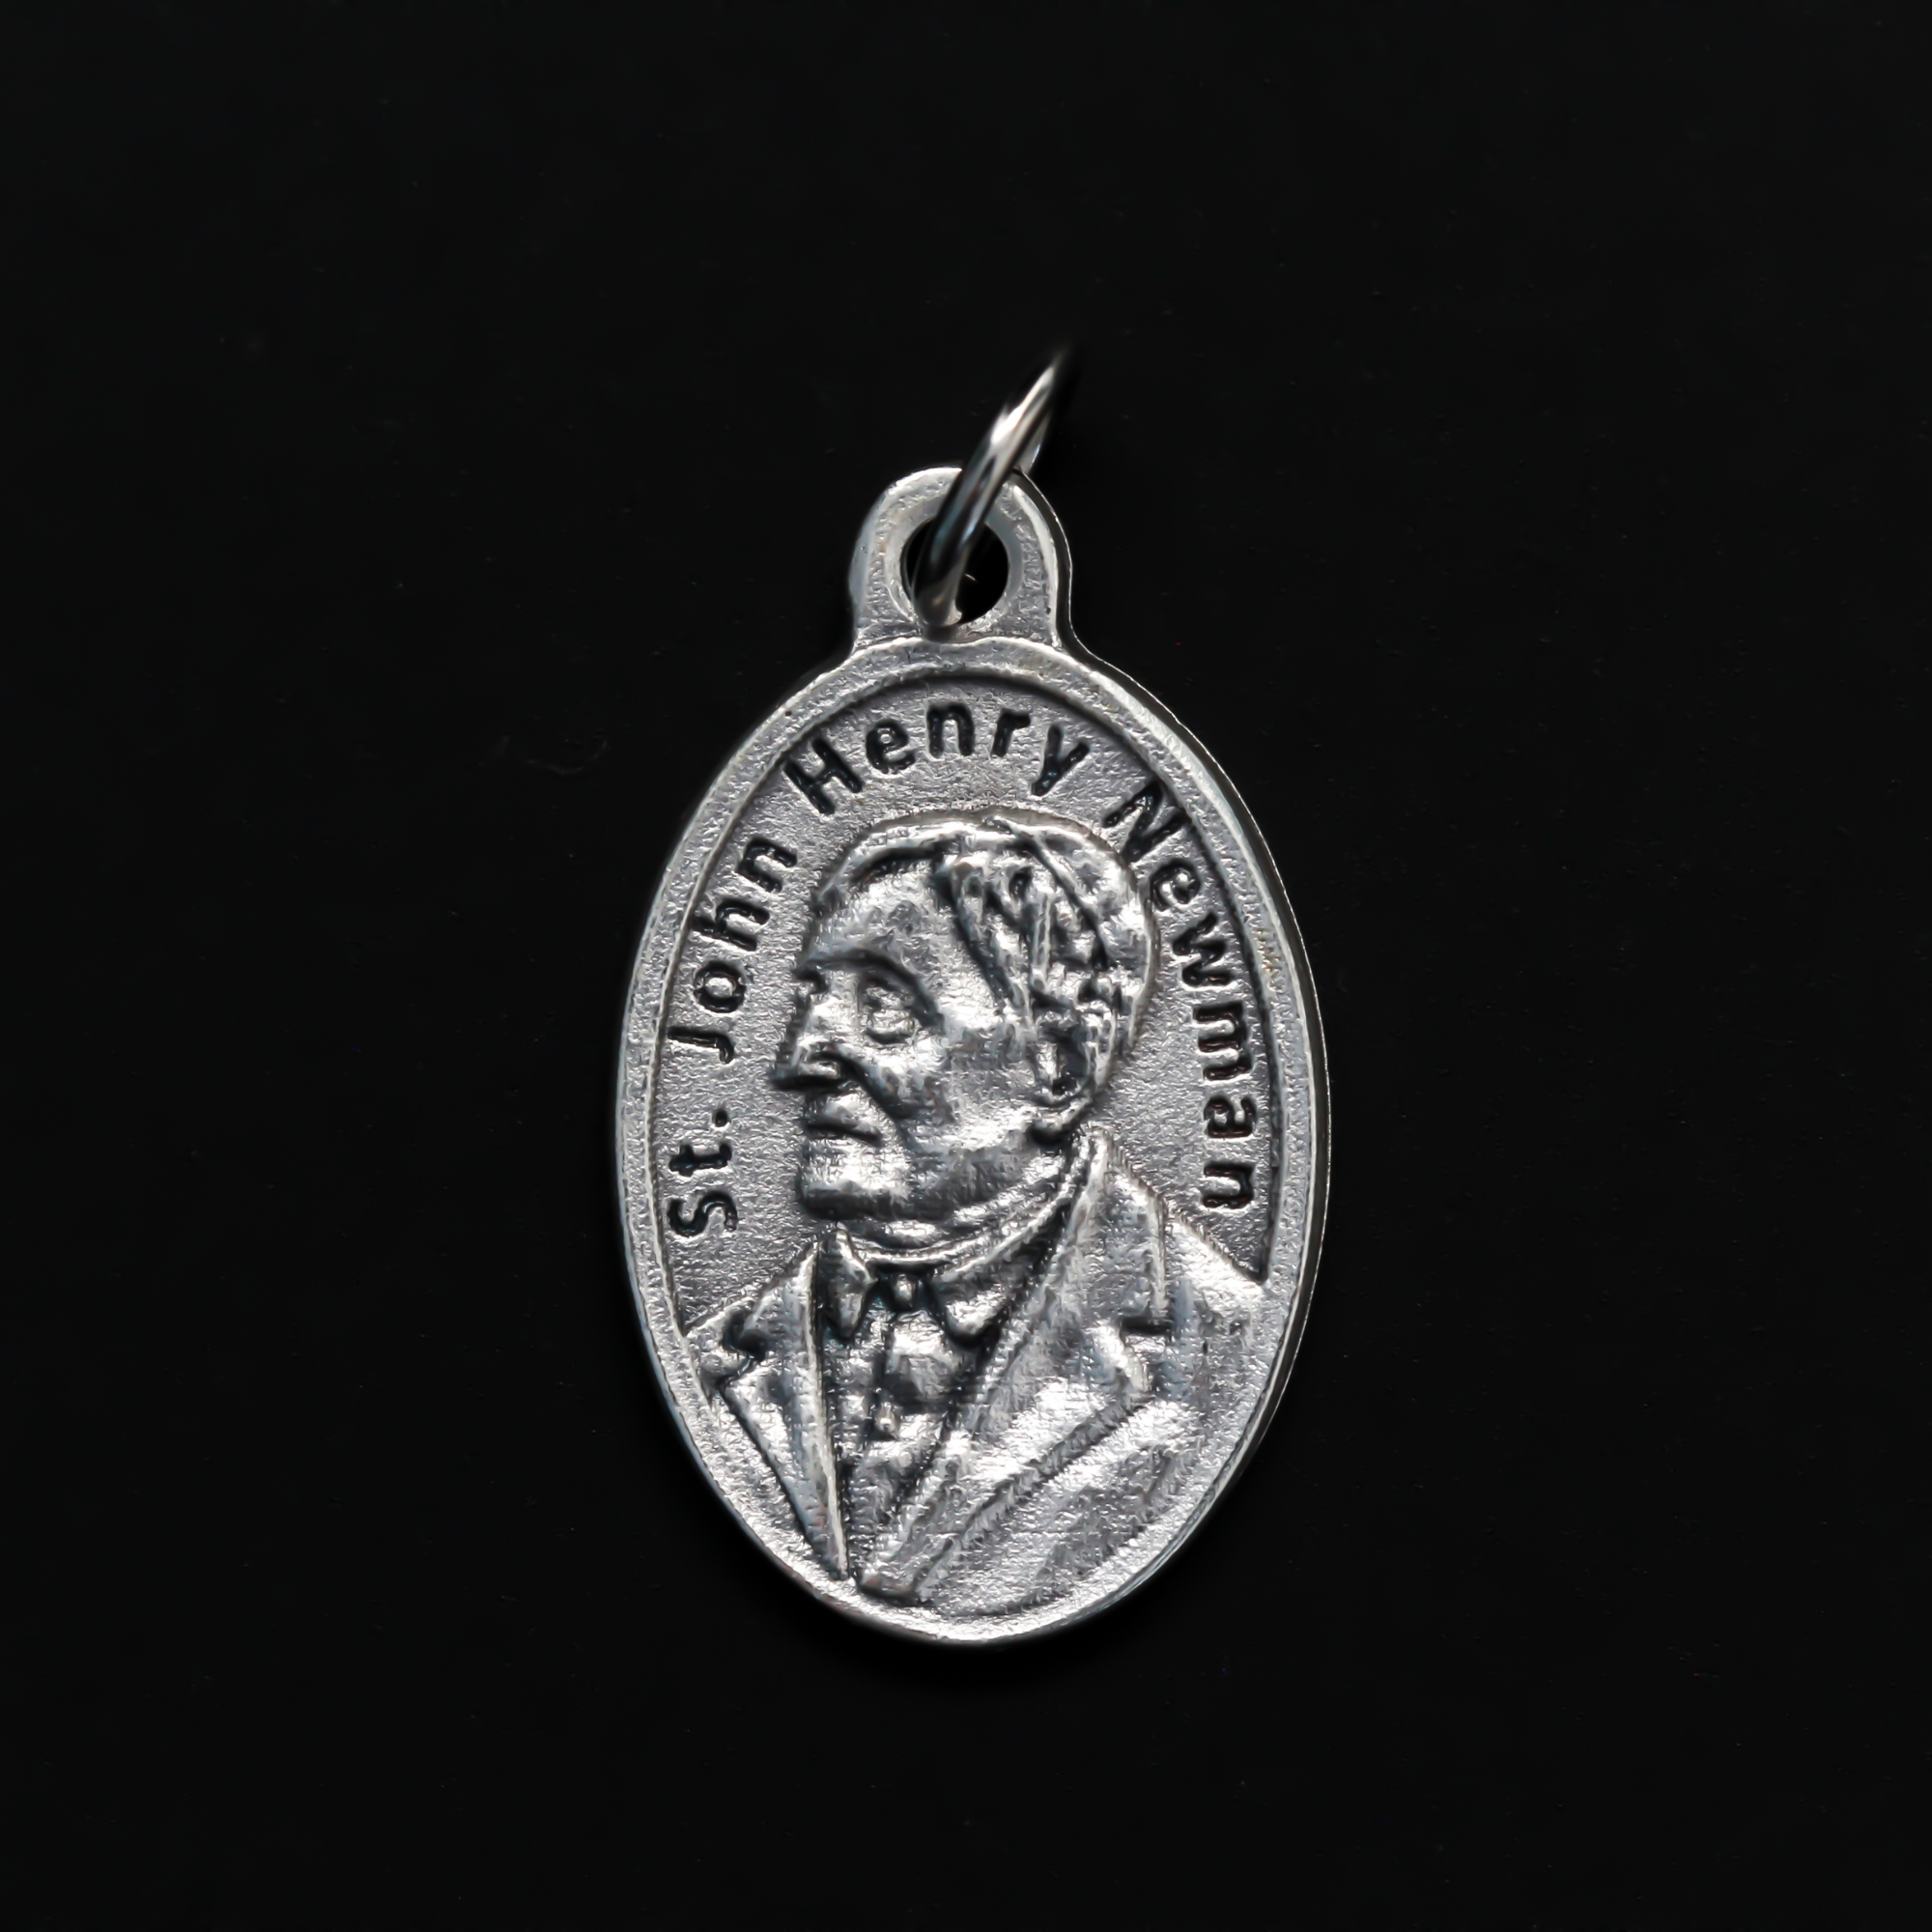 Saint John Henry Newman medal that depicts the saint on the front and is marked "Pray For Us" on the back